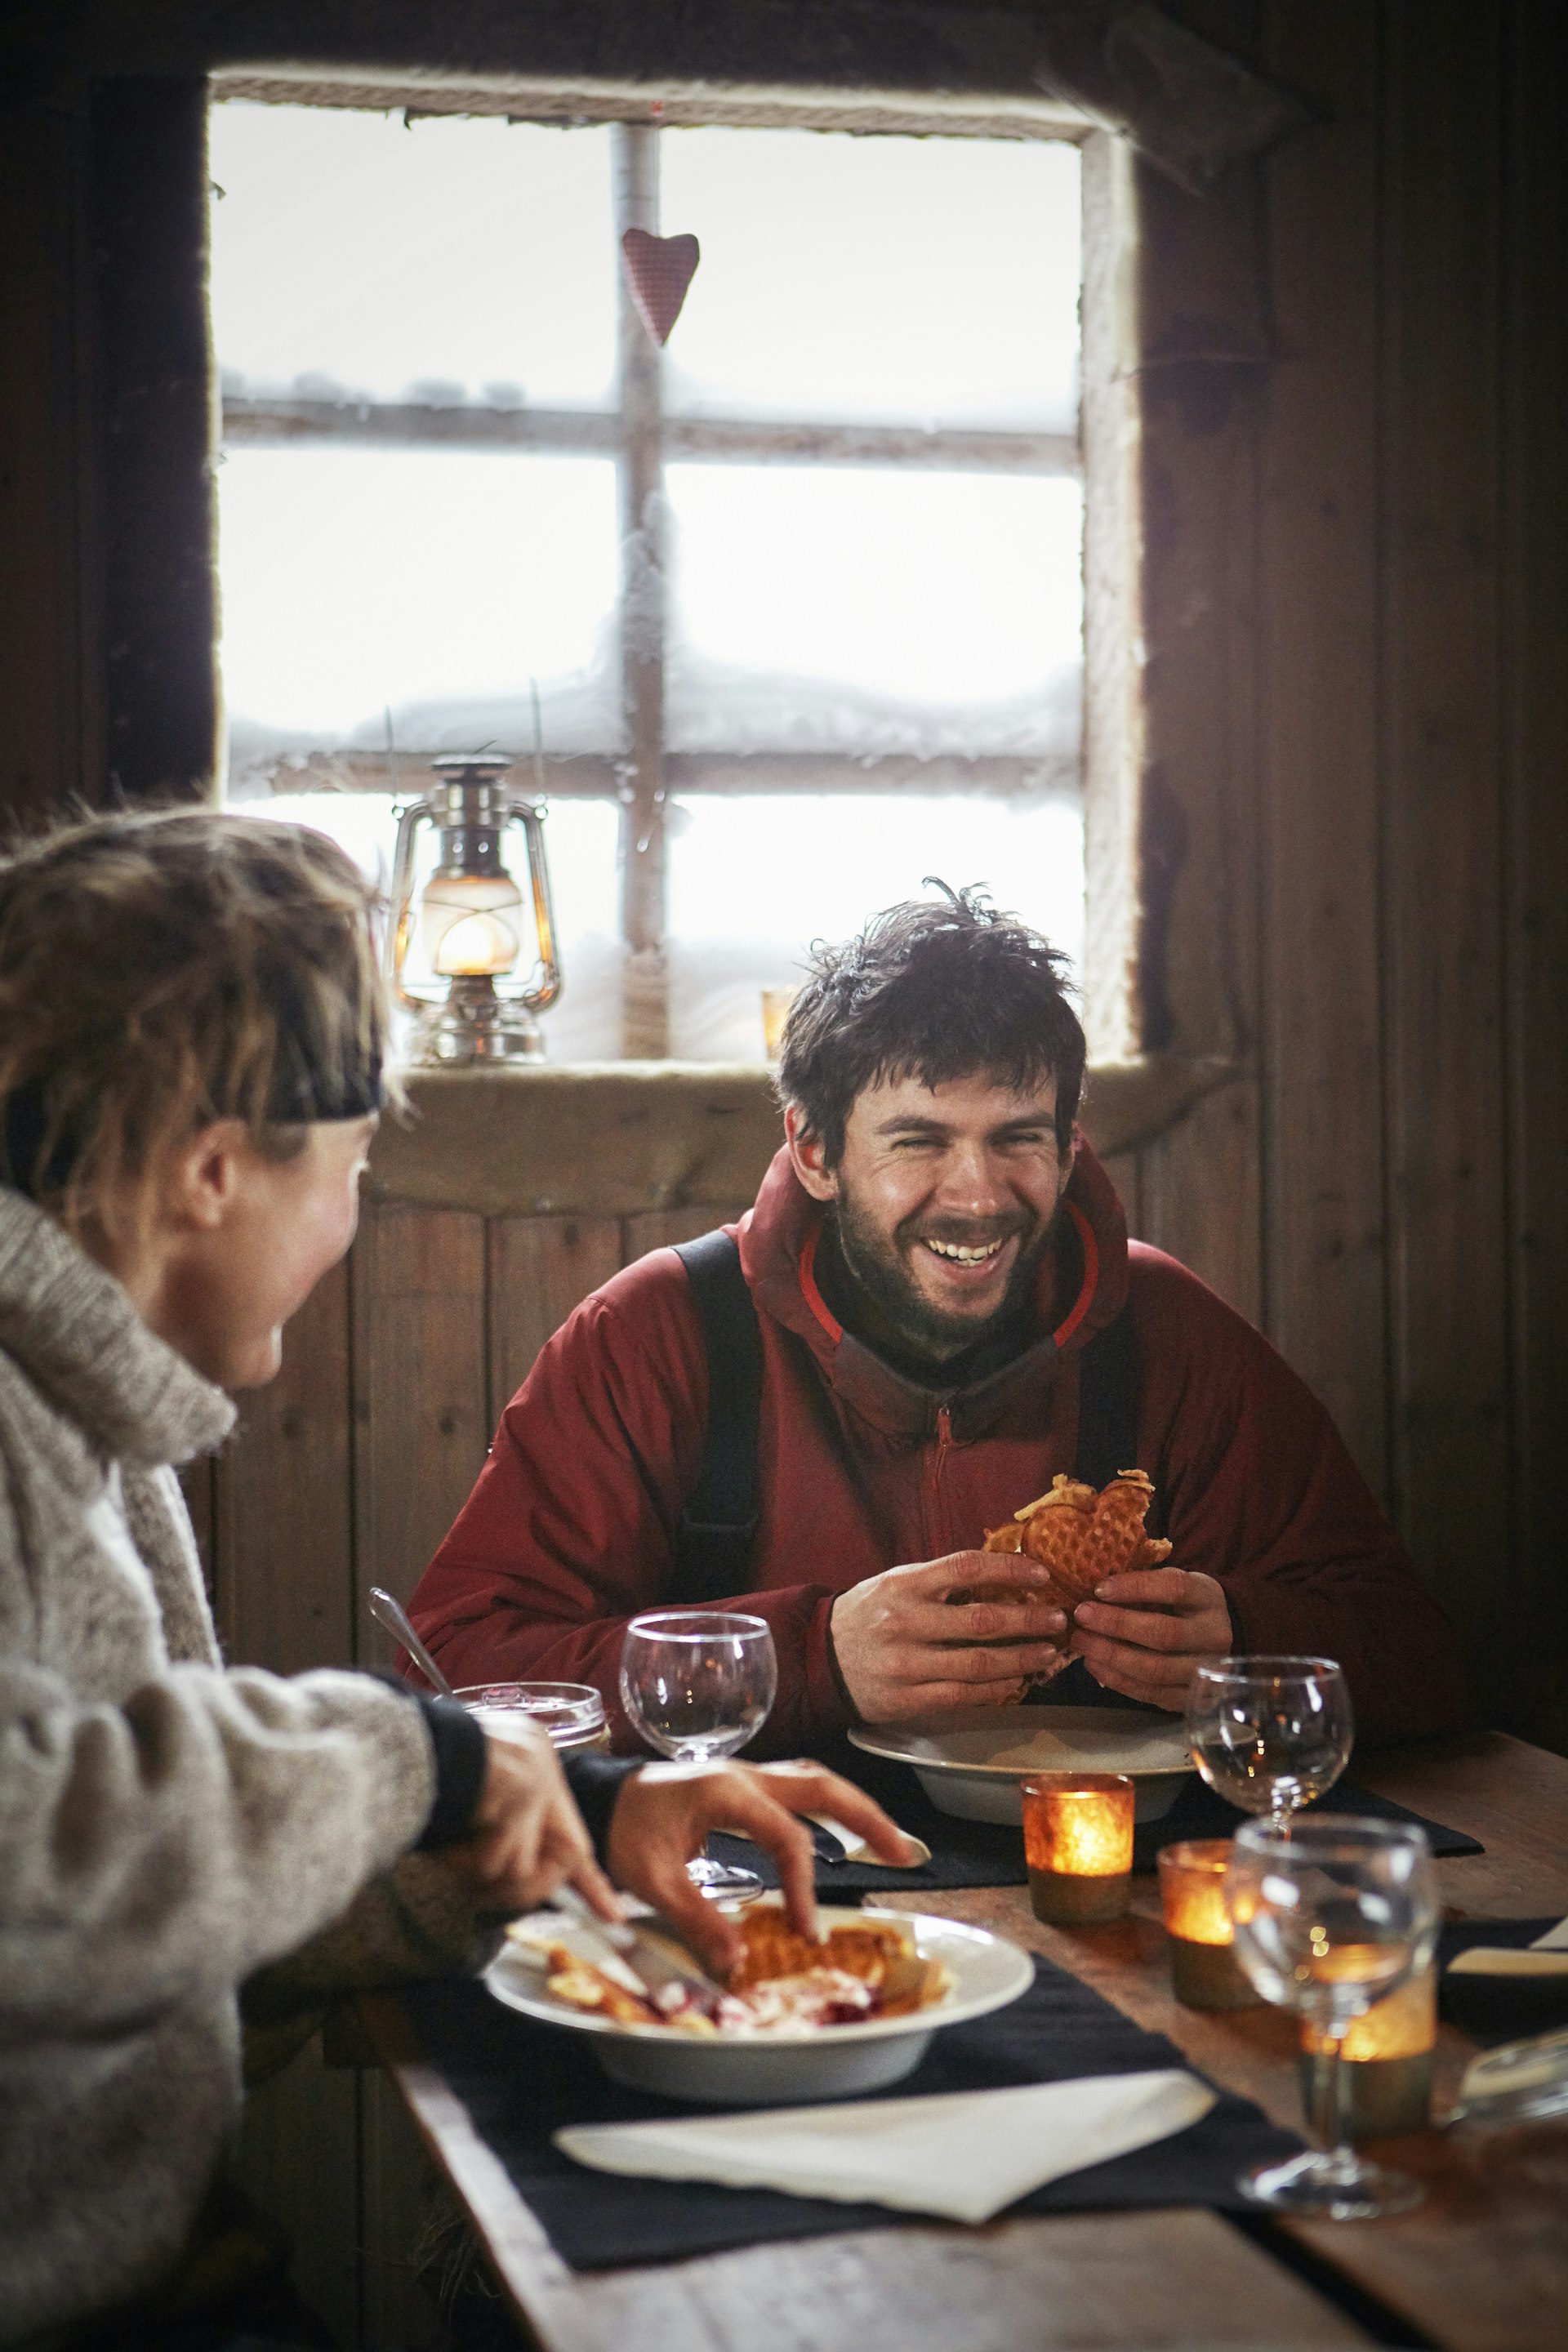 A man laughs while eating waffles inside a cabin